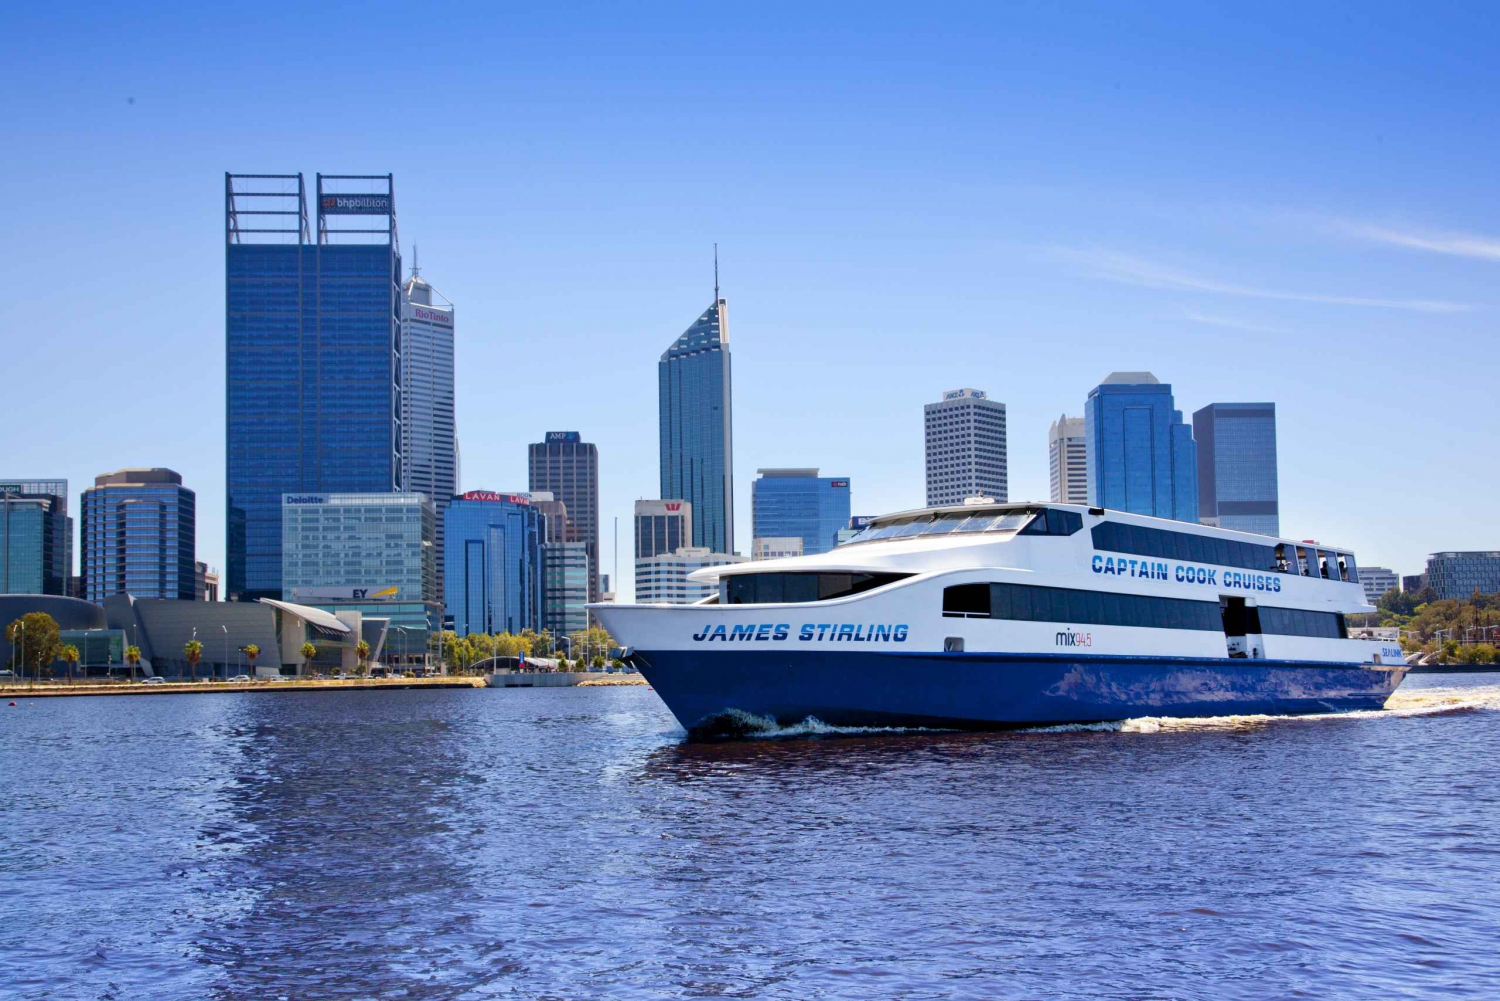 Swan River: Round-Trip Cruise from Perth or Fremantle